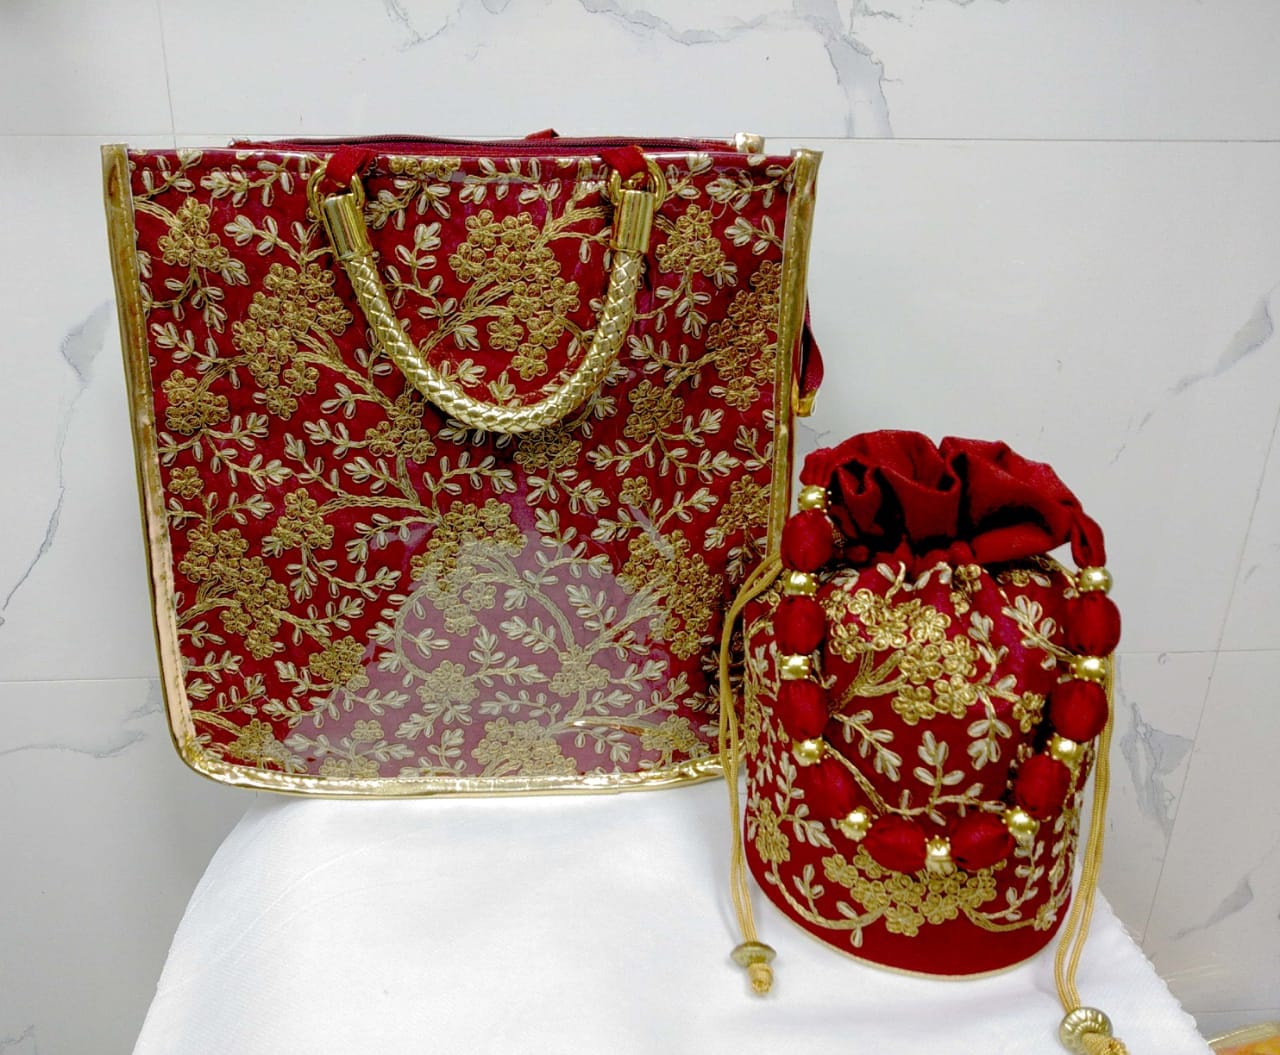 Buy Bridal Purse Online In India - Etsy India